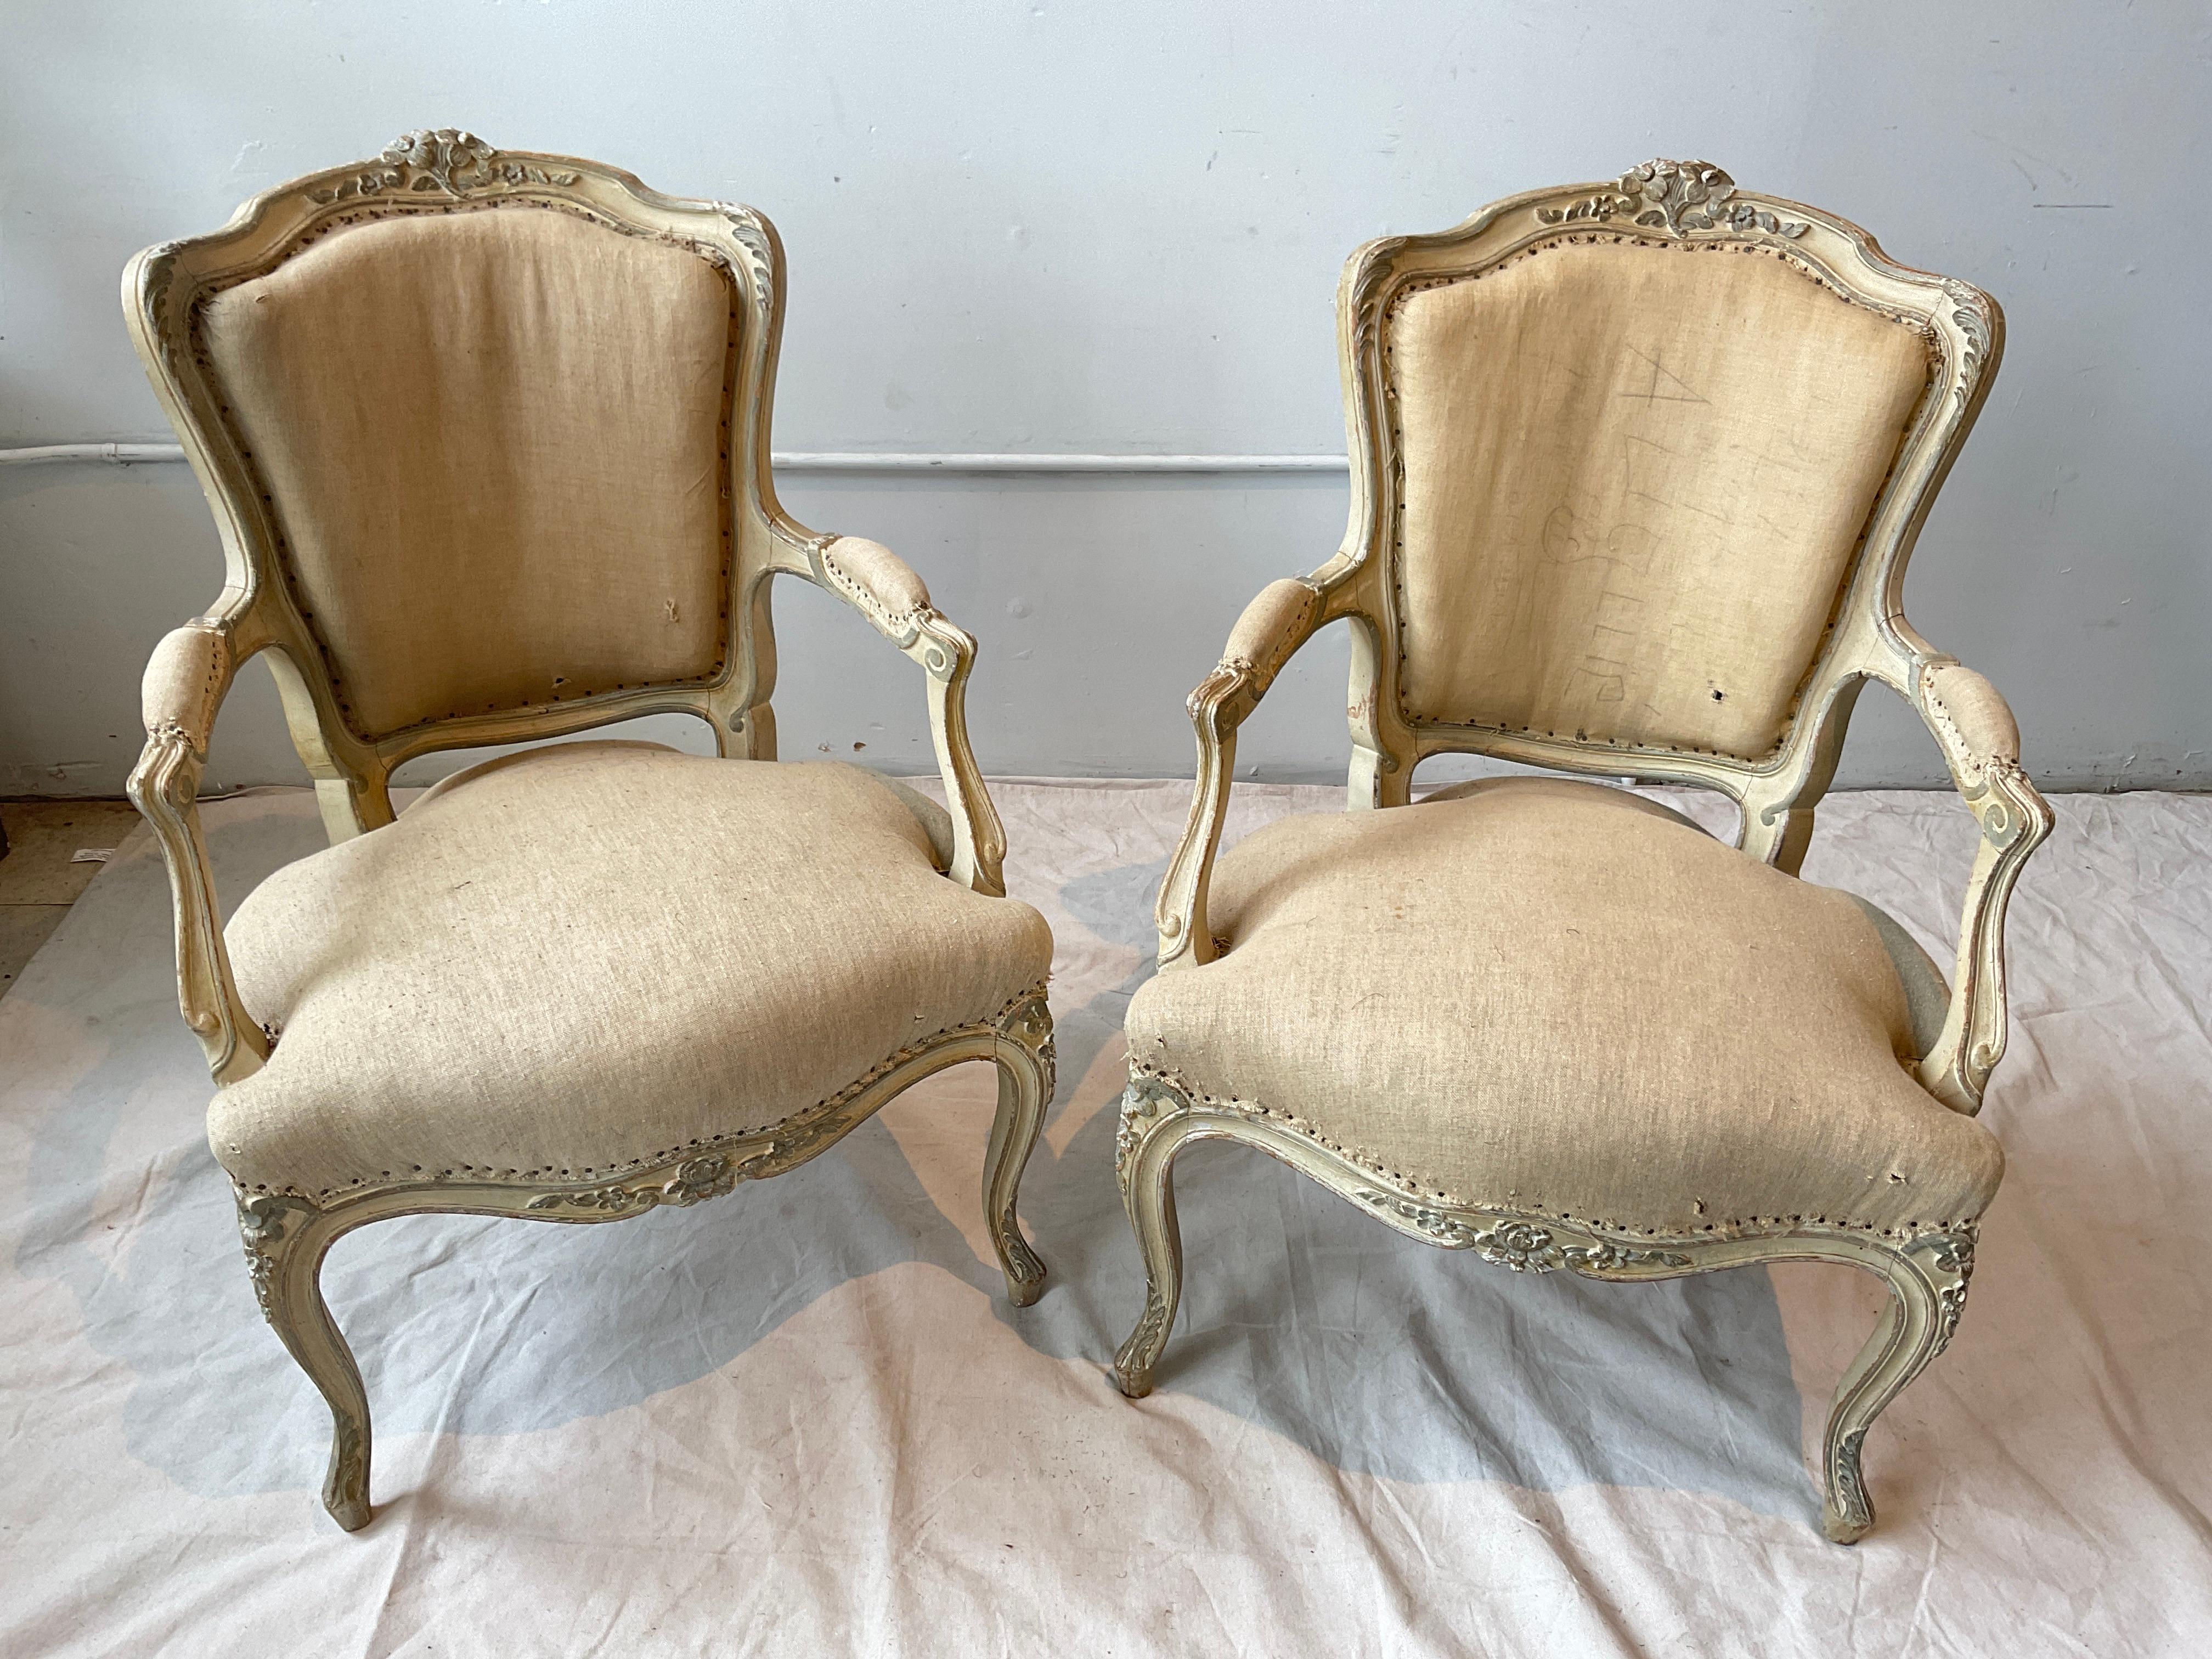 Pair of 1920s French Bergere chairs. Beige with grey accents.
Needs reupholstering. Has writing on fabric.